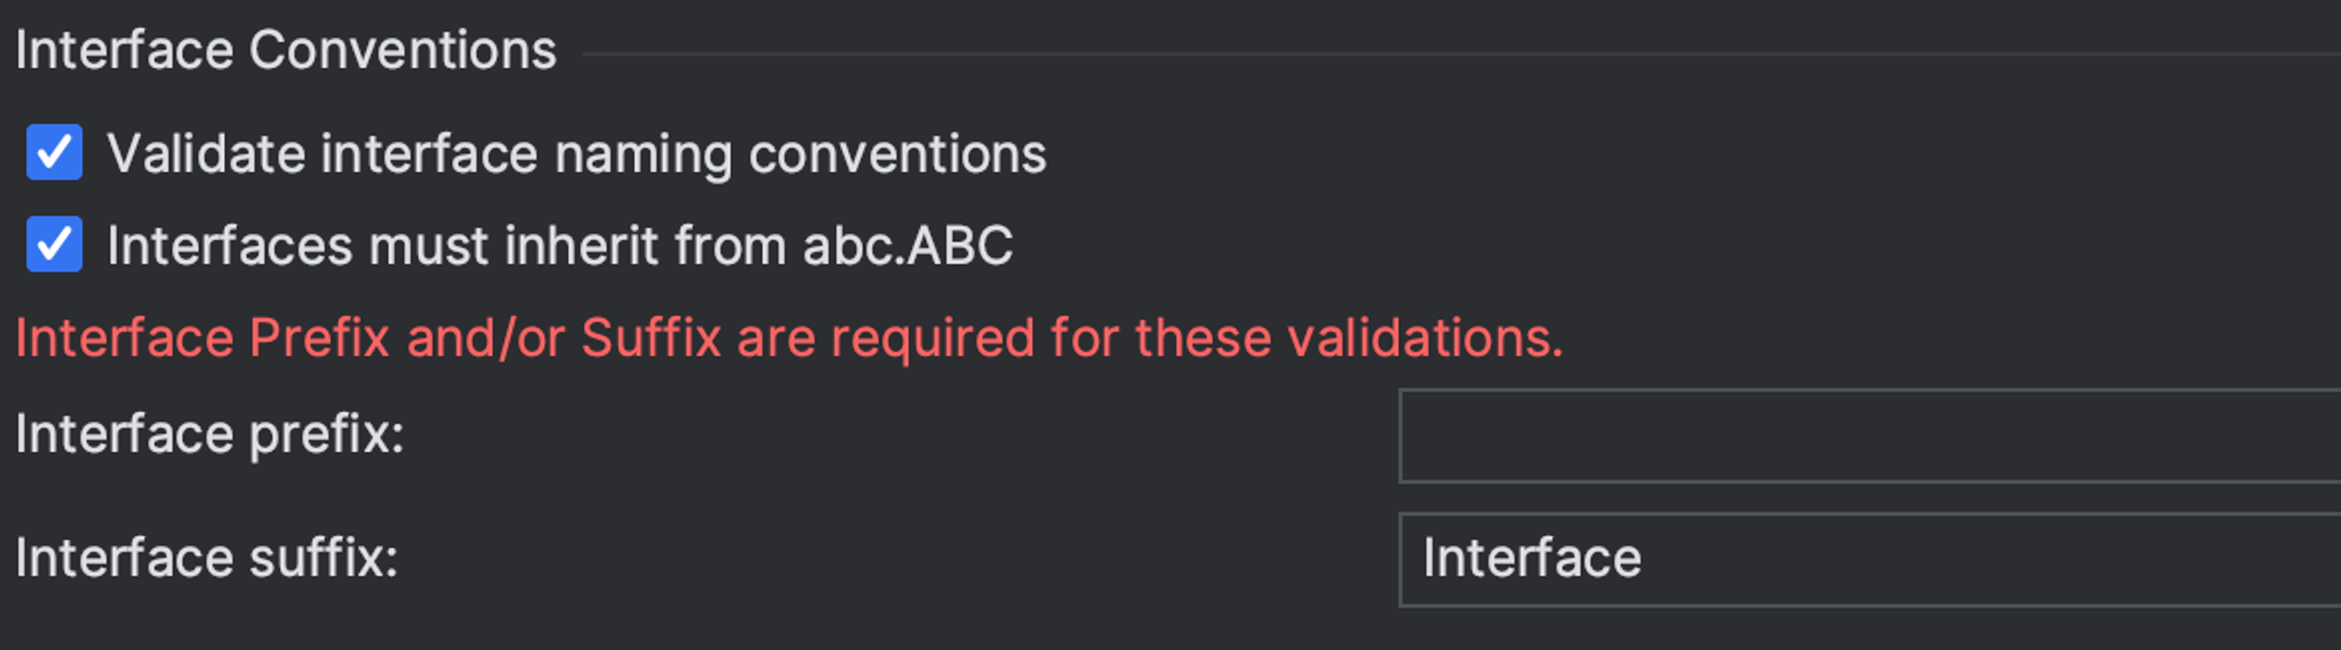 Interface naming conventions can be configured with a Prefix or a Suffix. These are required for ABC validations